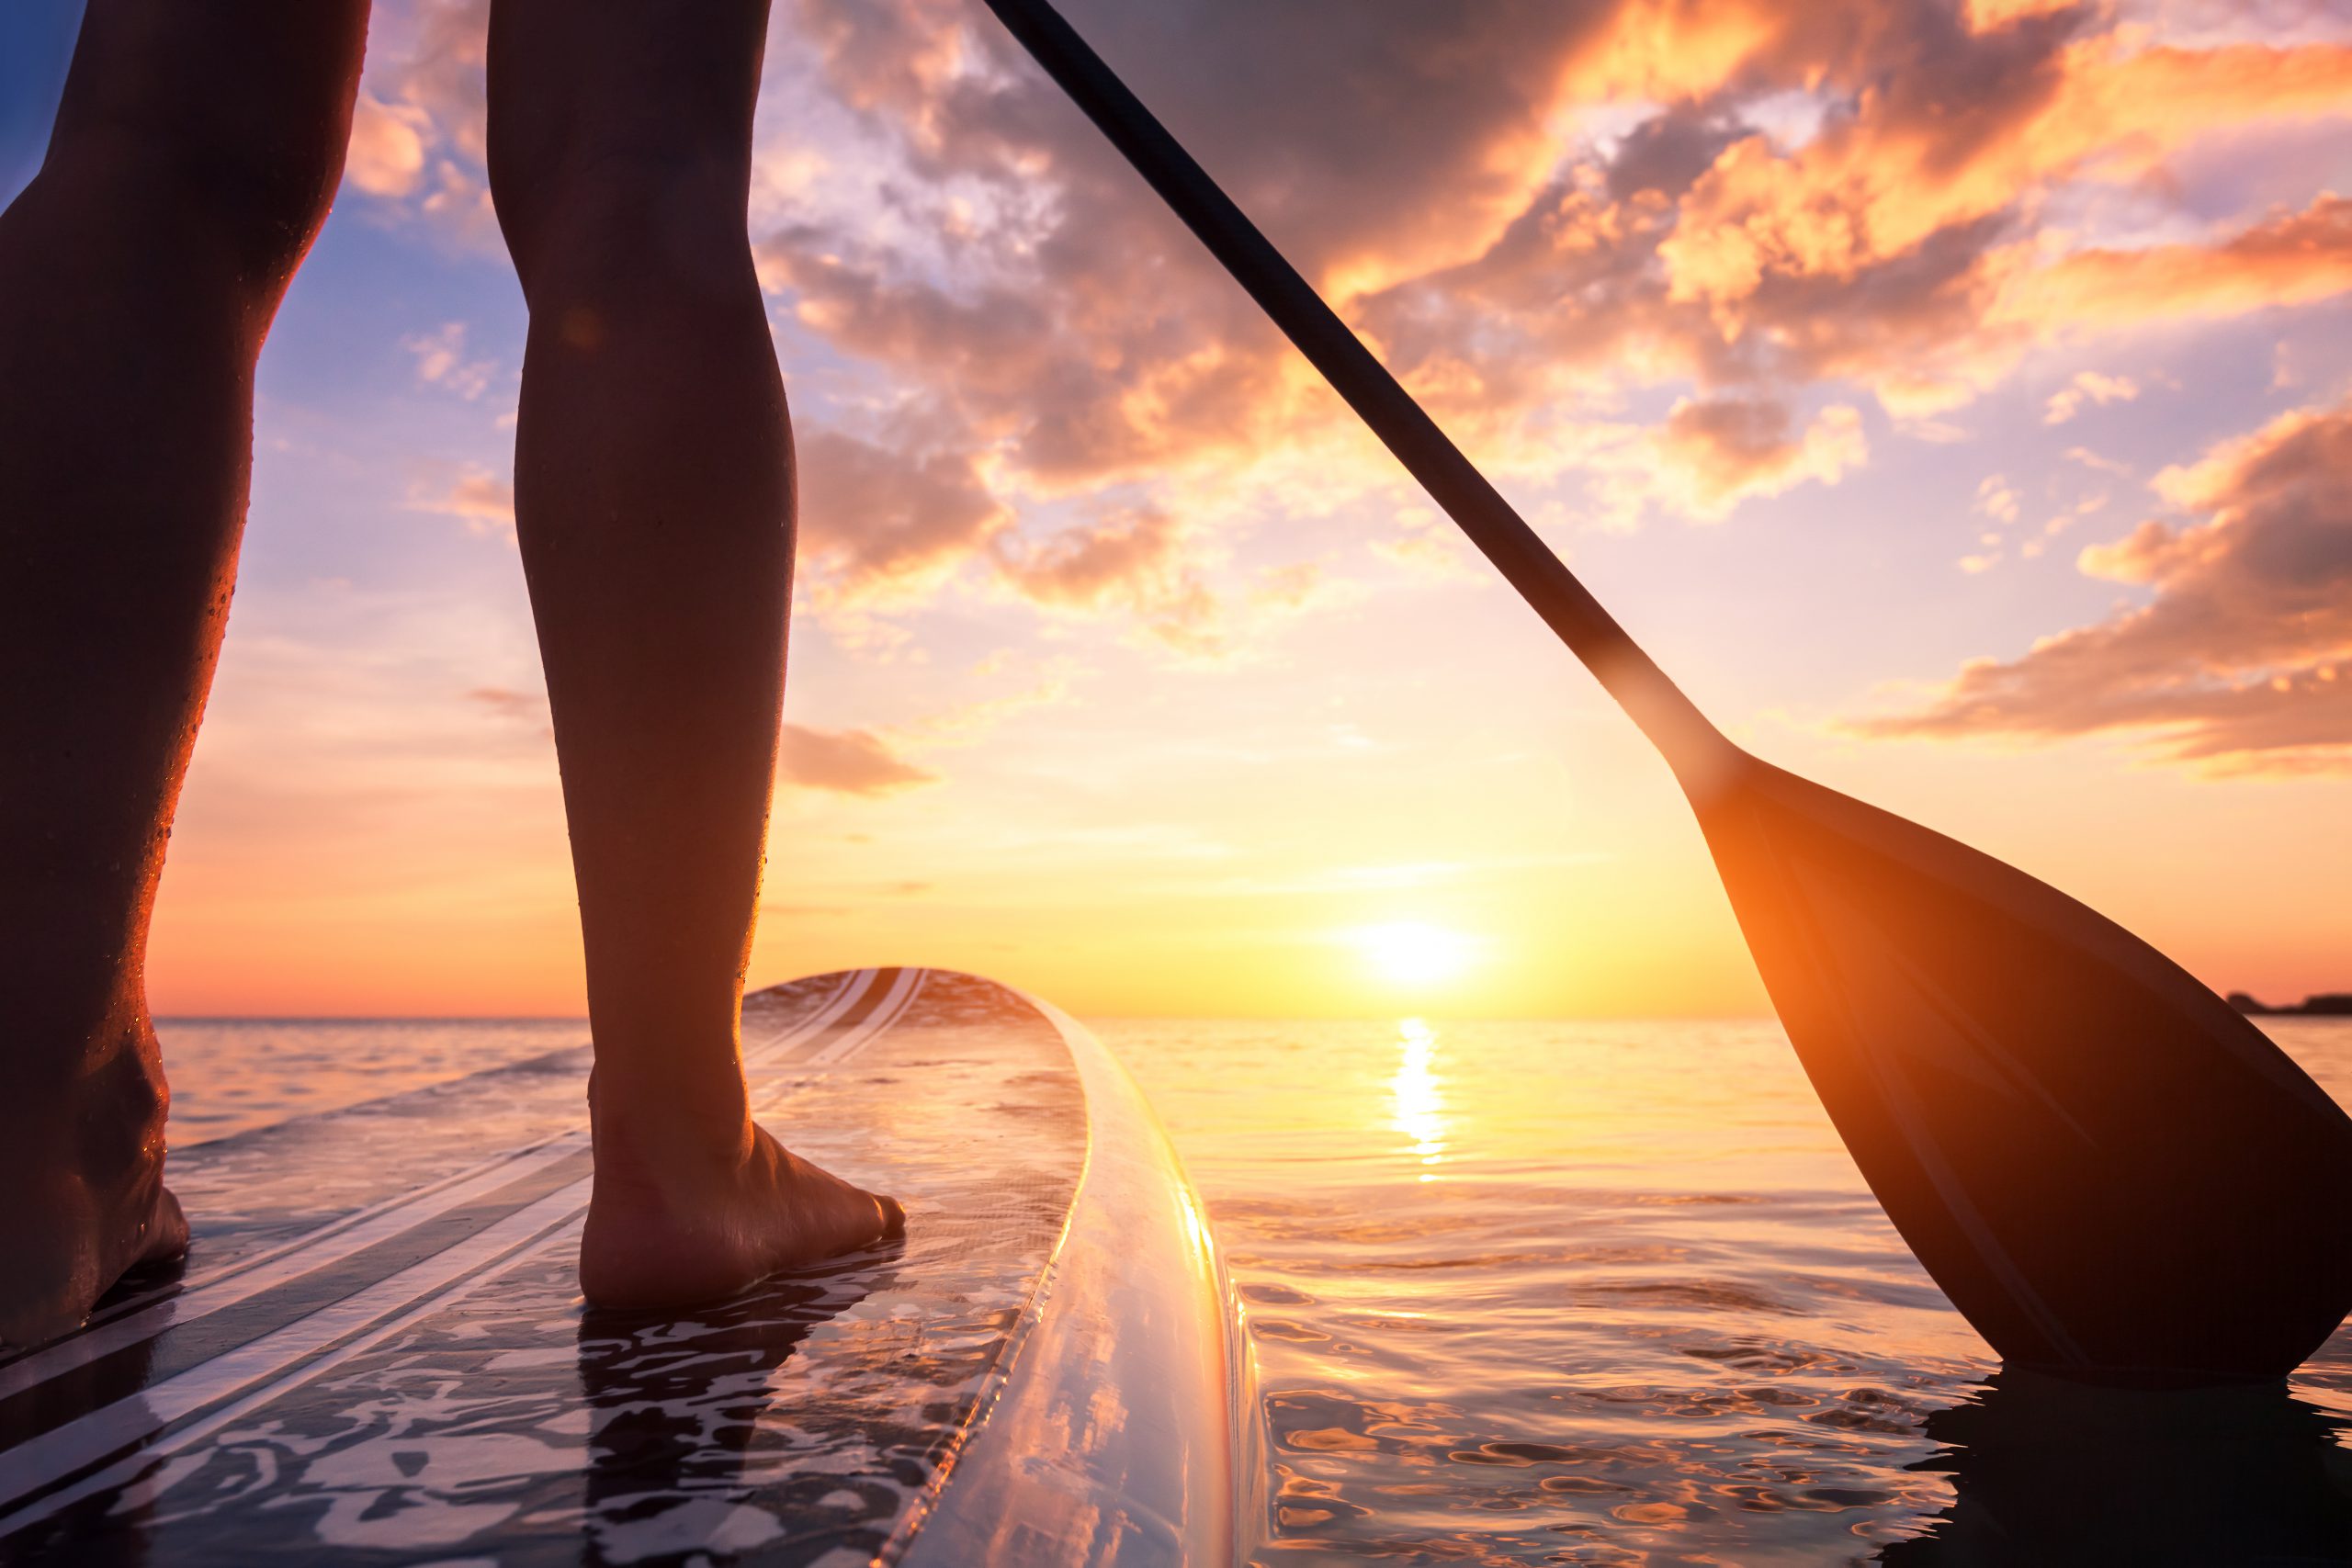 Stand up paddle boarding or standup paddleboarding on quiet sea at sunset with beautiful colours during warm summer beach vacation holiday, active woman, close-up of water surface, legs and board